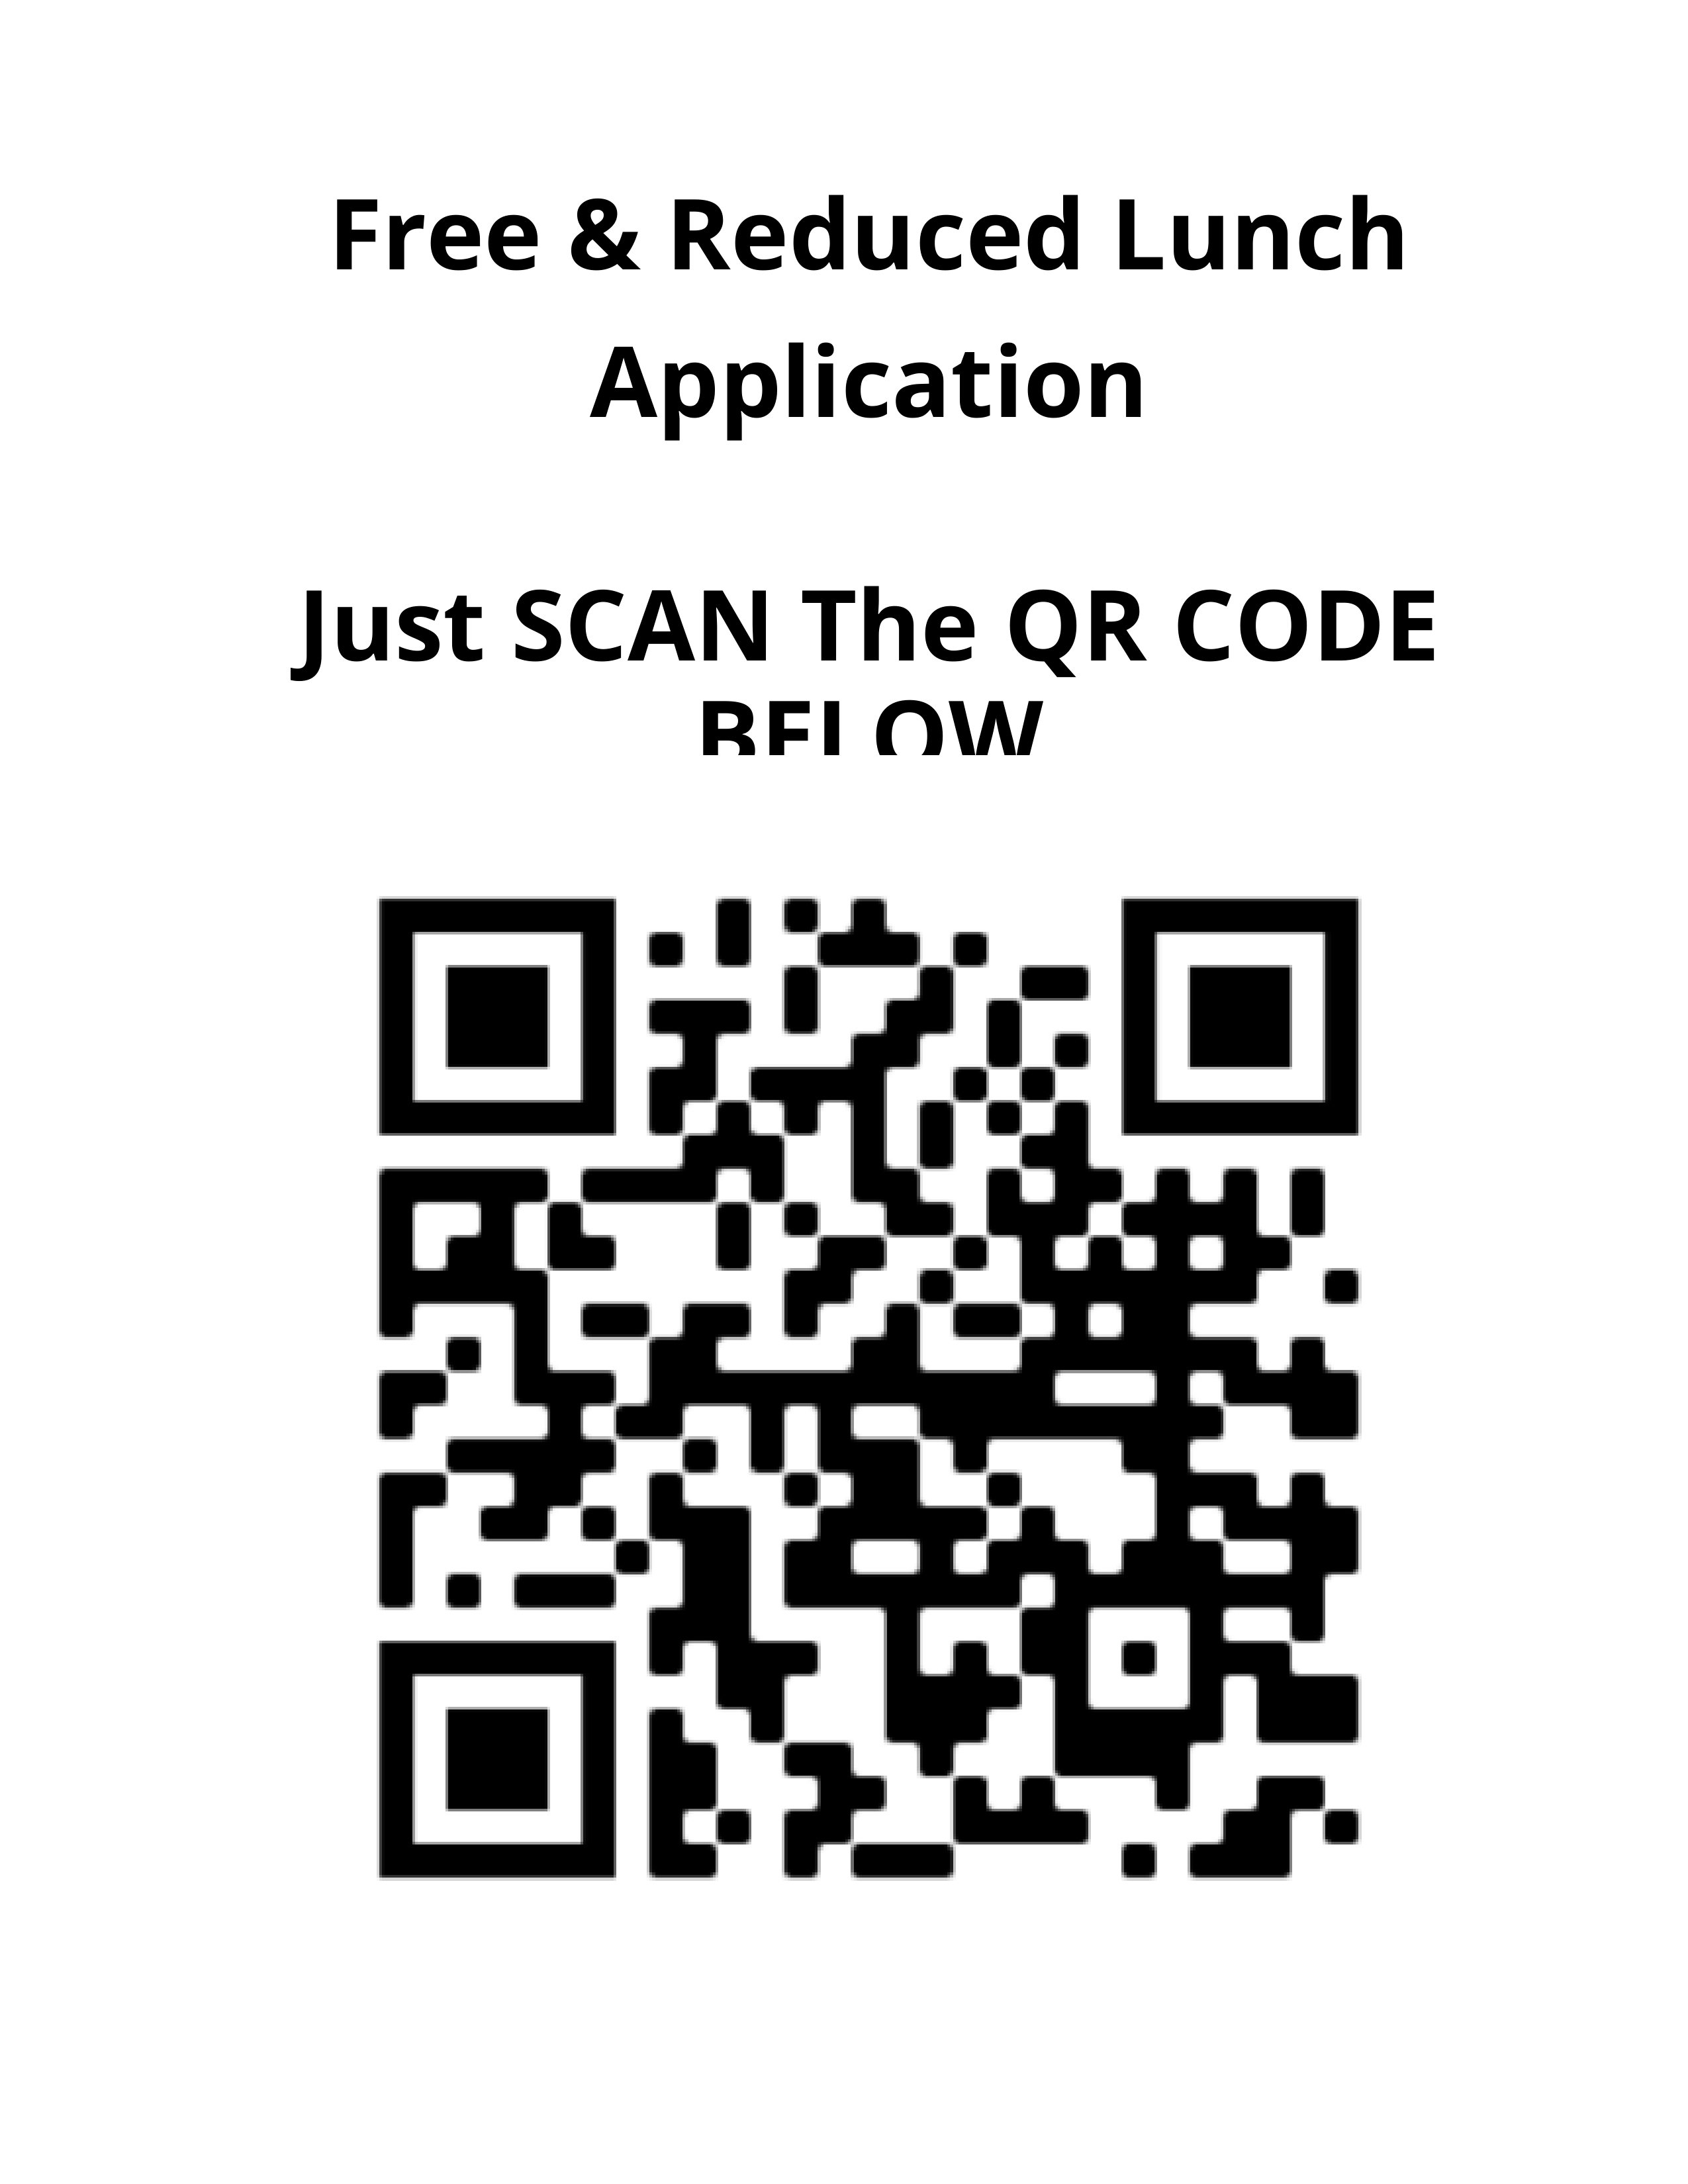 Free & Reduced Lunch Application QR Code